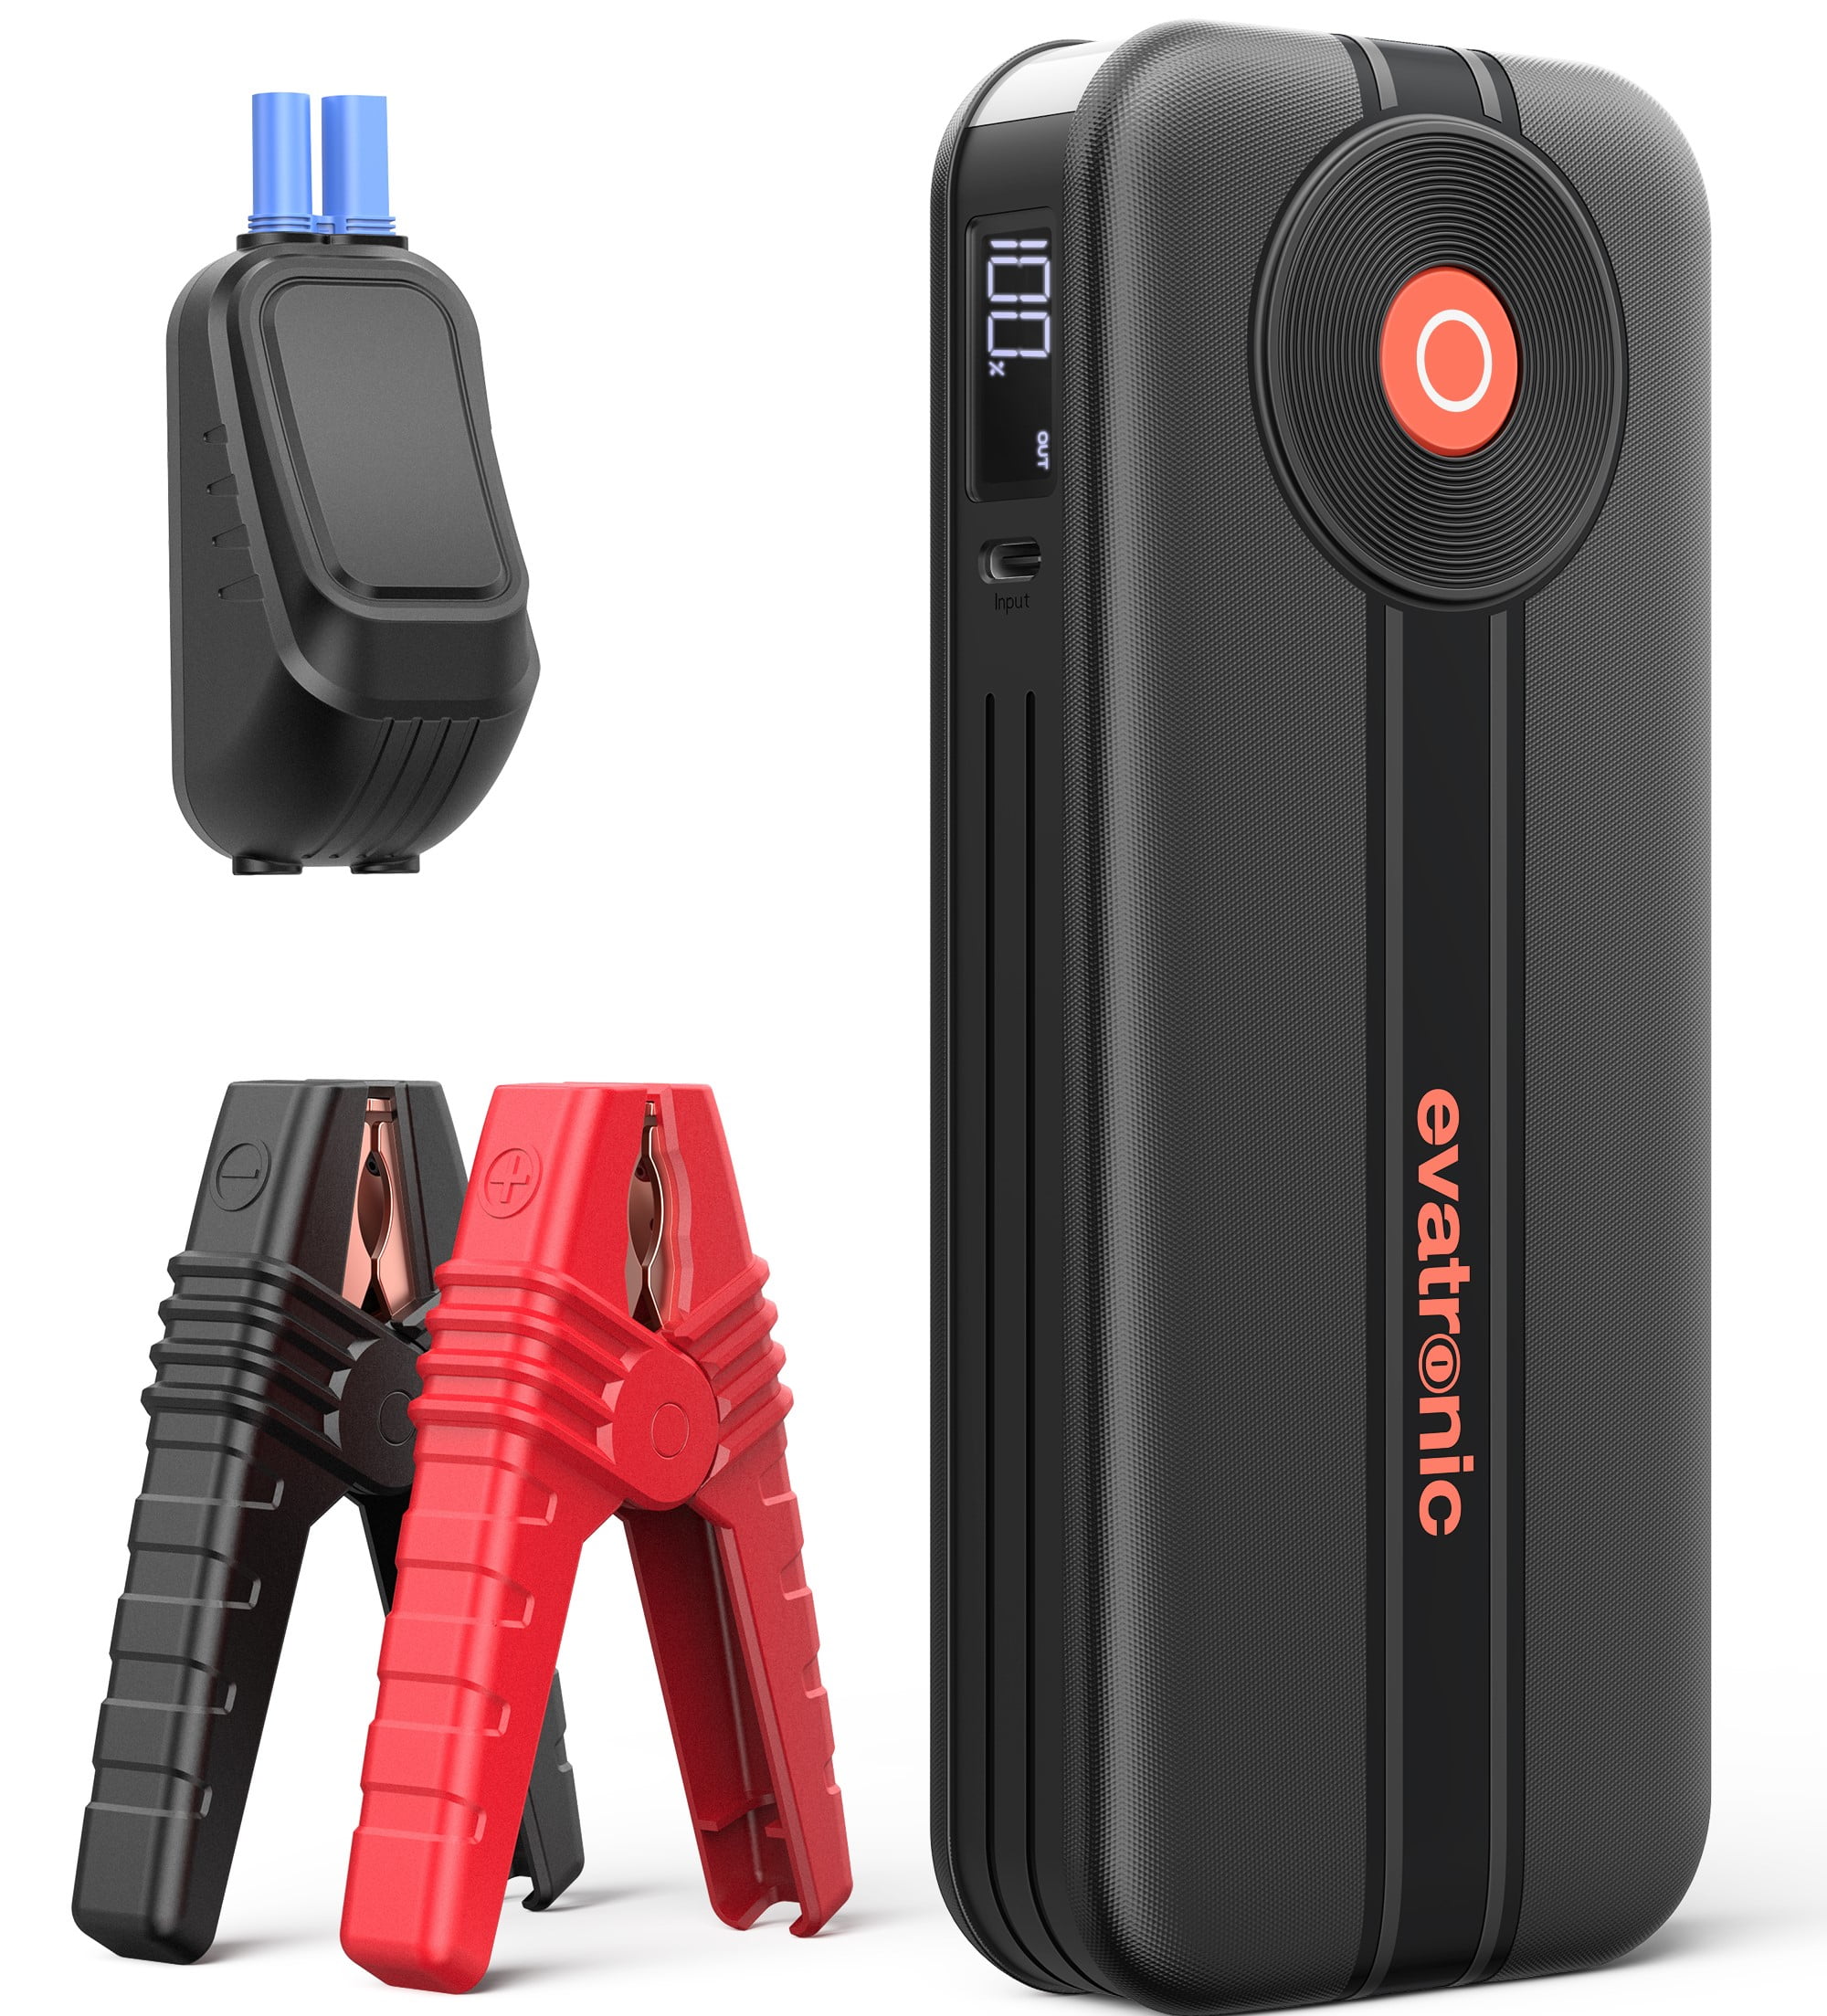  GOOLOO GP4000 Jump Starter Box 4000A Peak Car Starter (All  Gas,up to 10.0L Diesel Engine) SuperSafe 12V Lithium, Auto Battery Booster  Pack,Portable Power Bank with USB Quick Charge and Type C